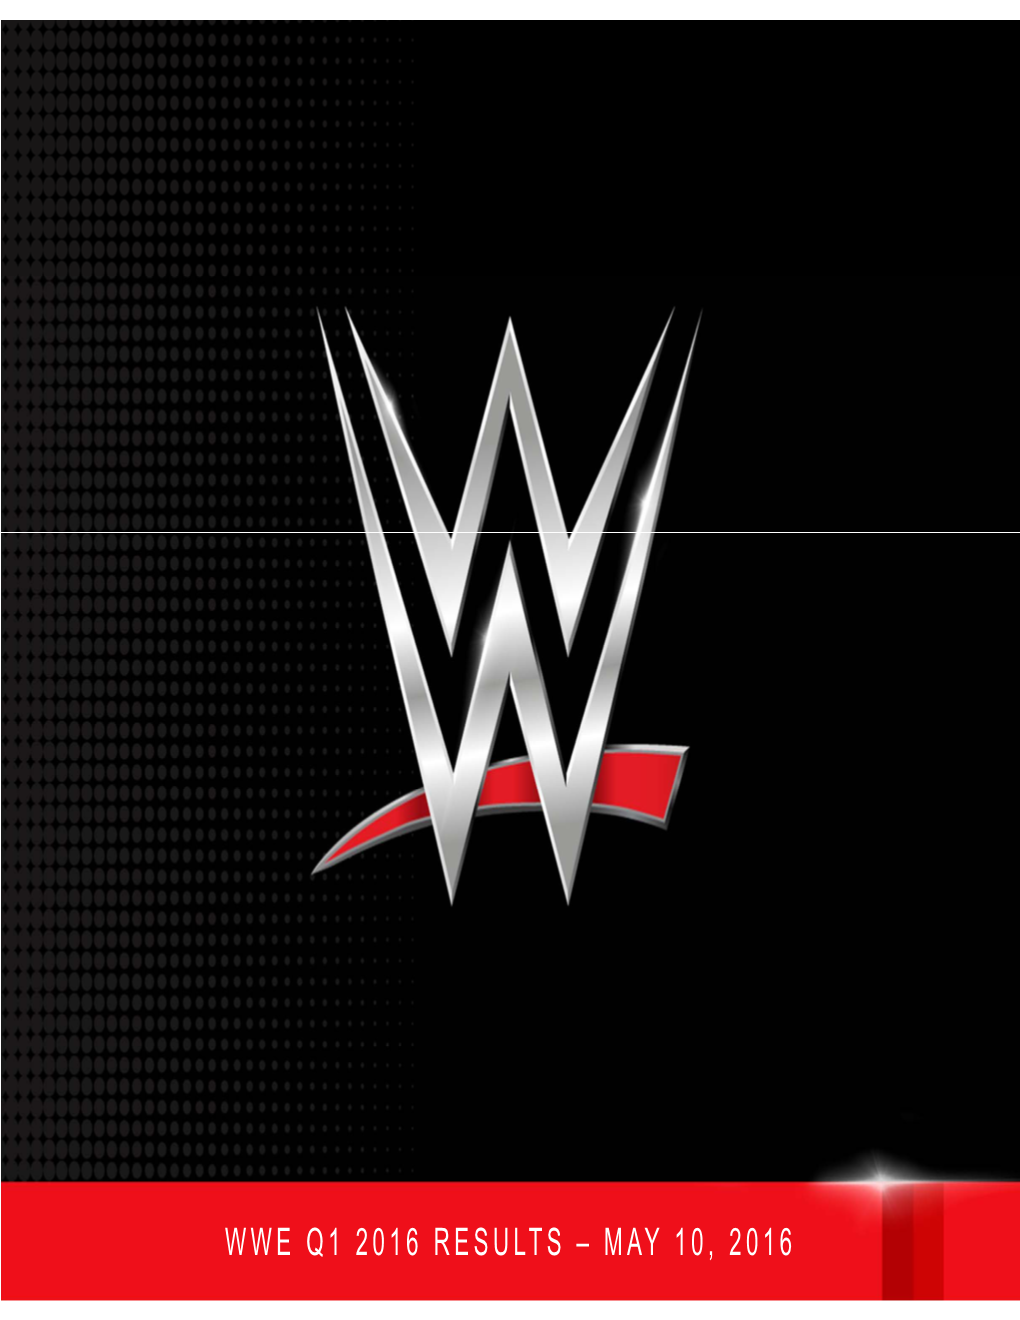 WWE Q1 2016 RESULTS – MAY 10, 2016 Forward-Looking Statements